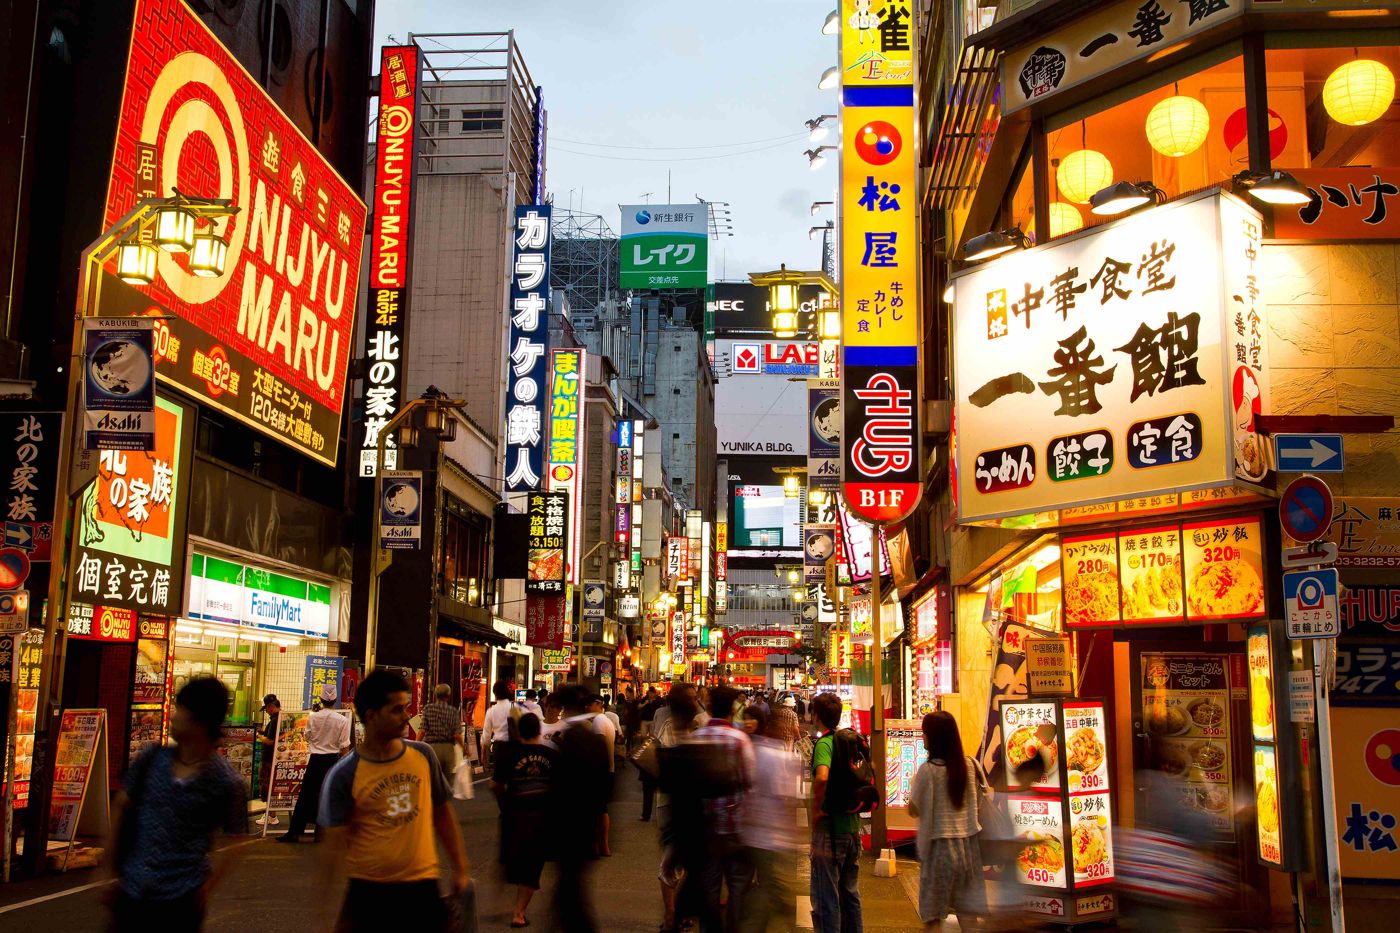 25 Weird and Interesting Facts about Japan